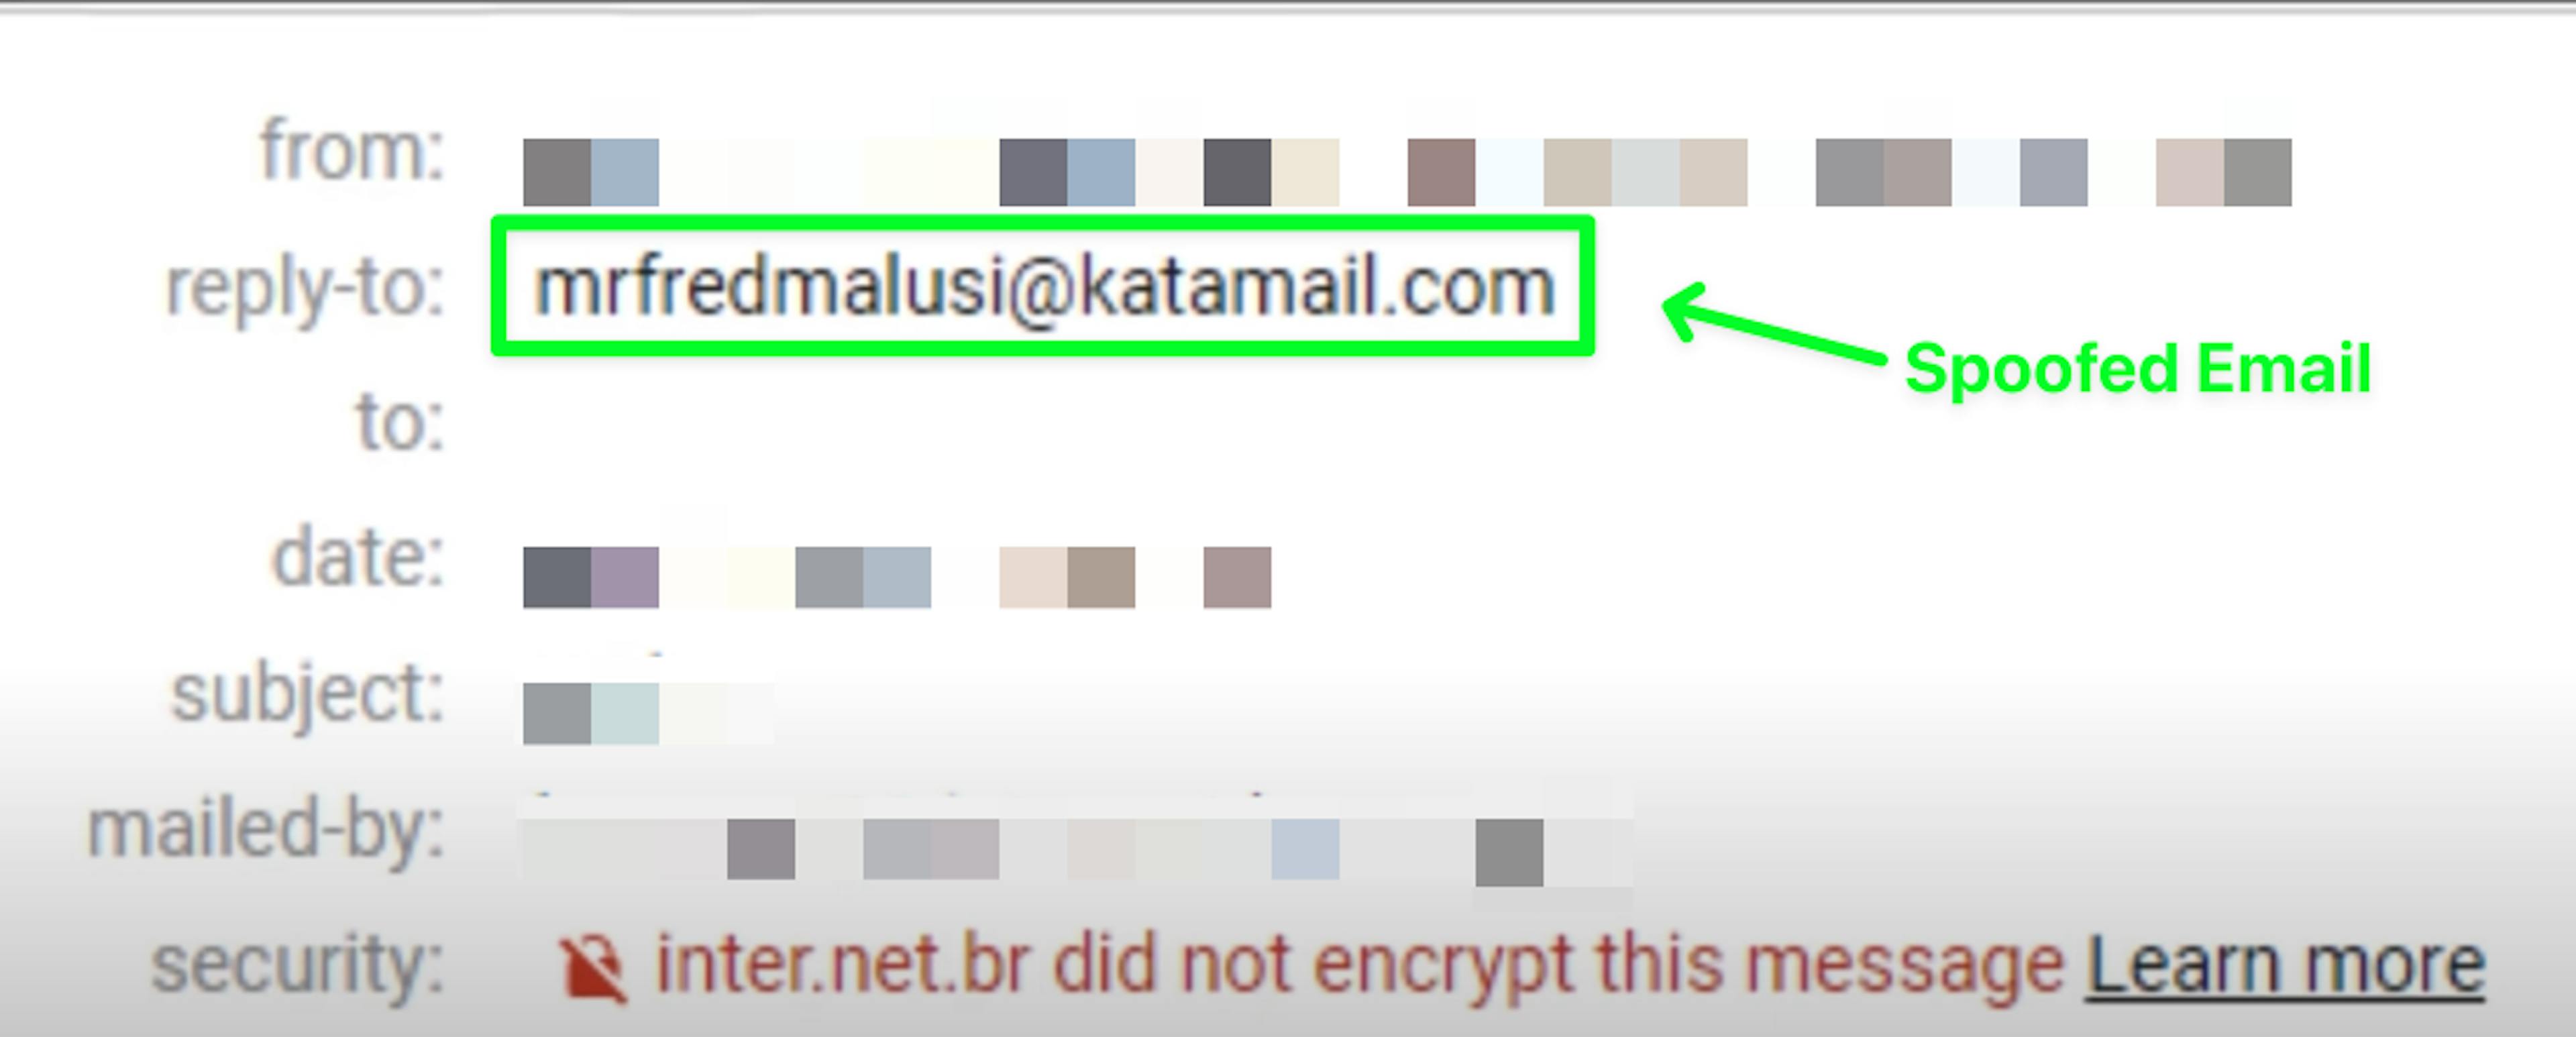 It's not easy to spot a spoofed email. Does the person sound like they normally would?